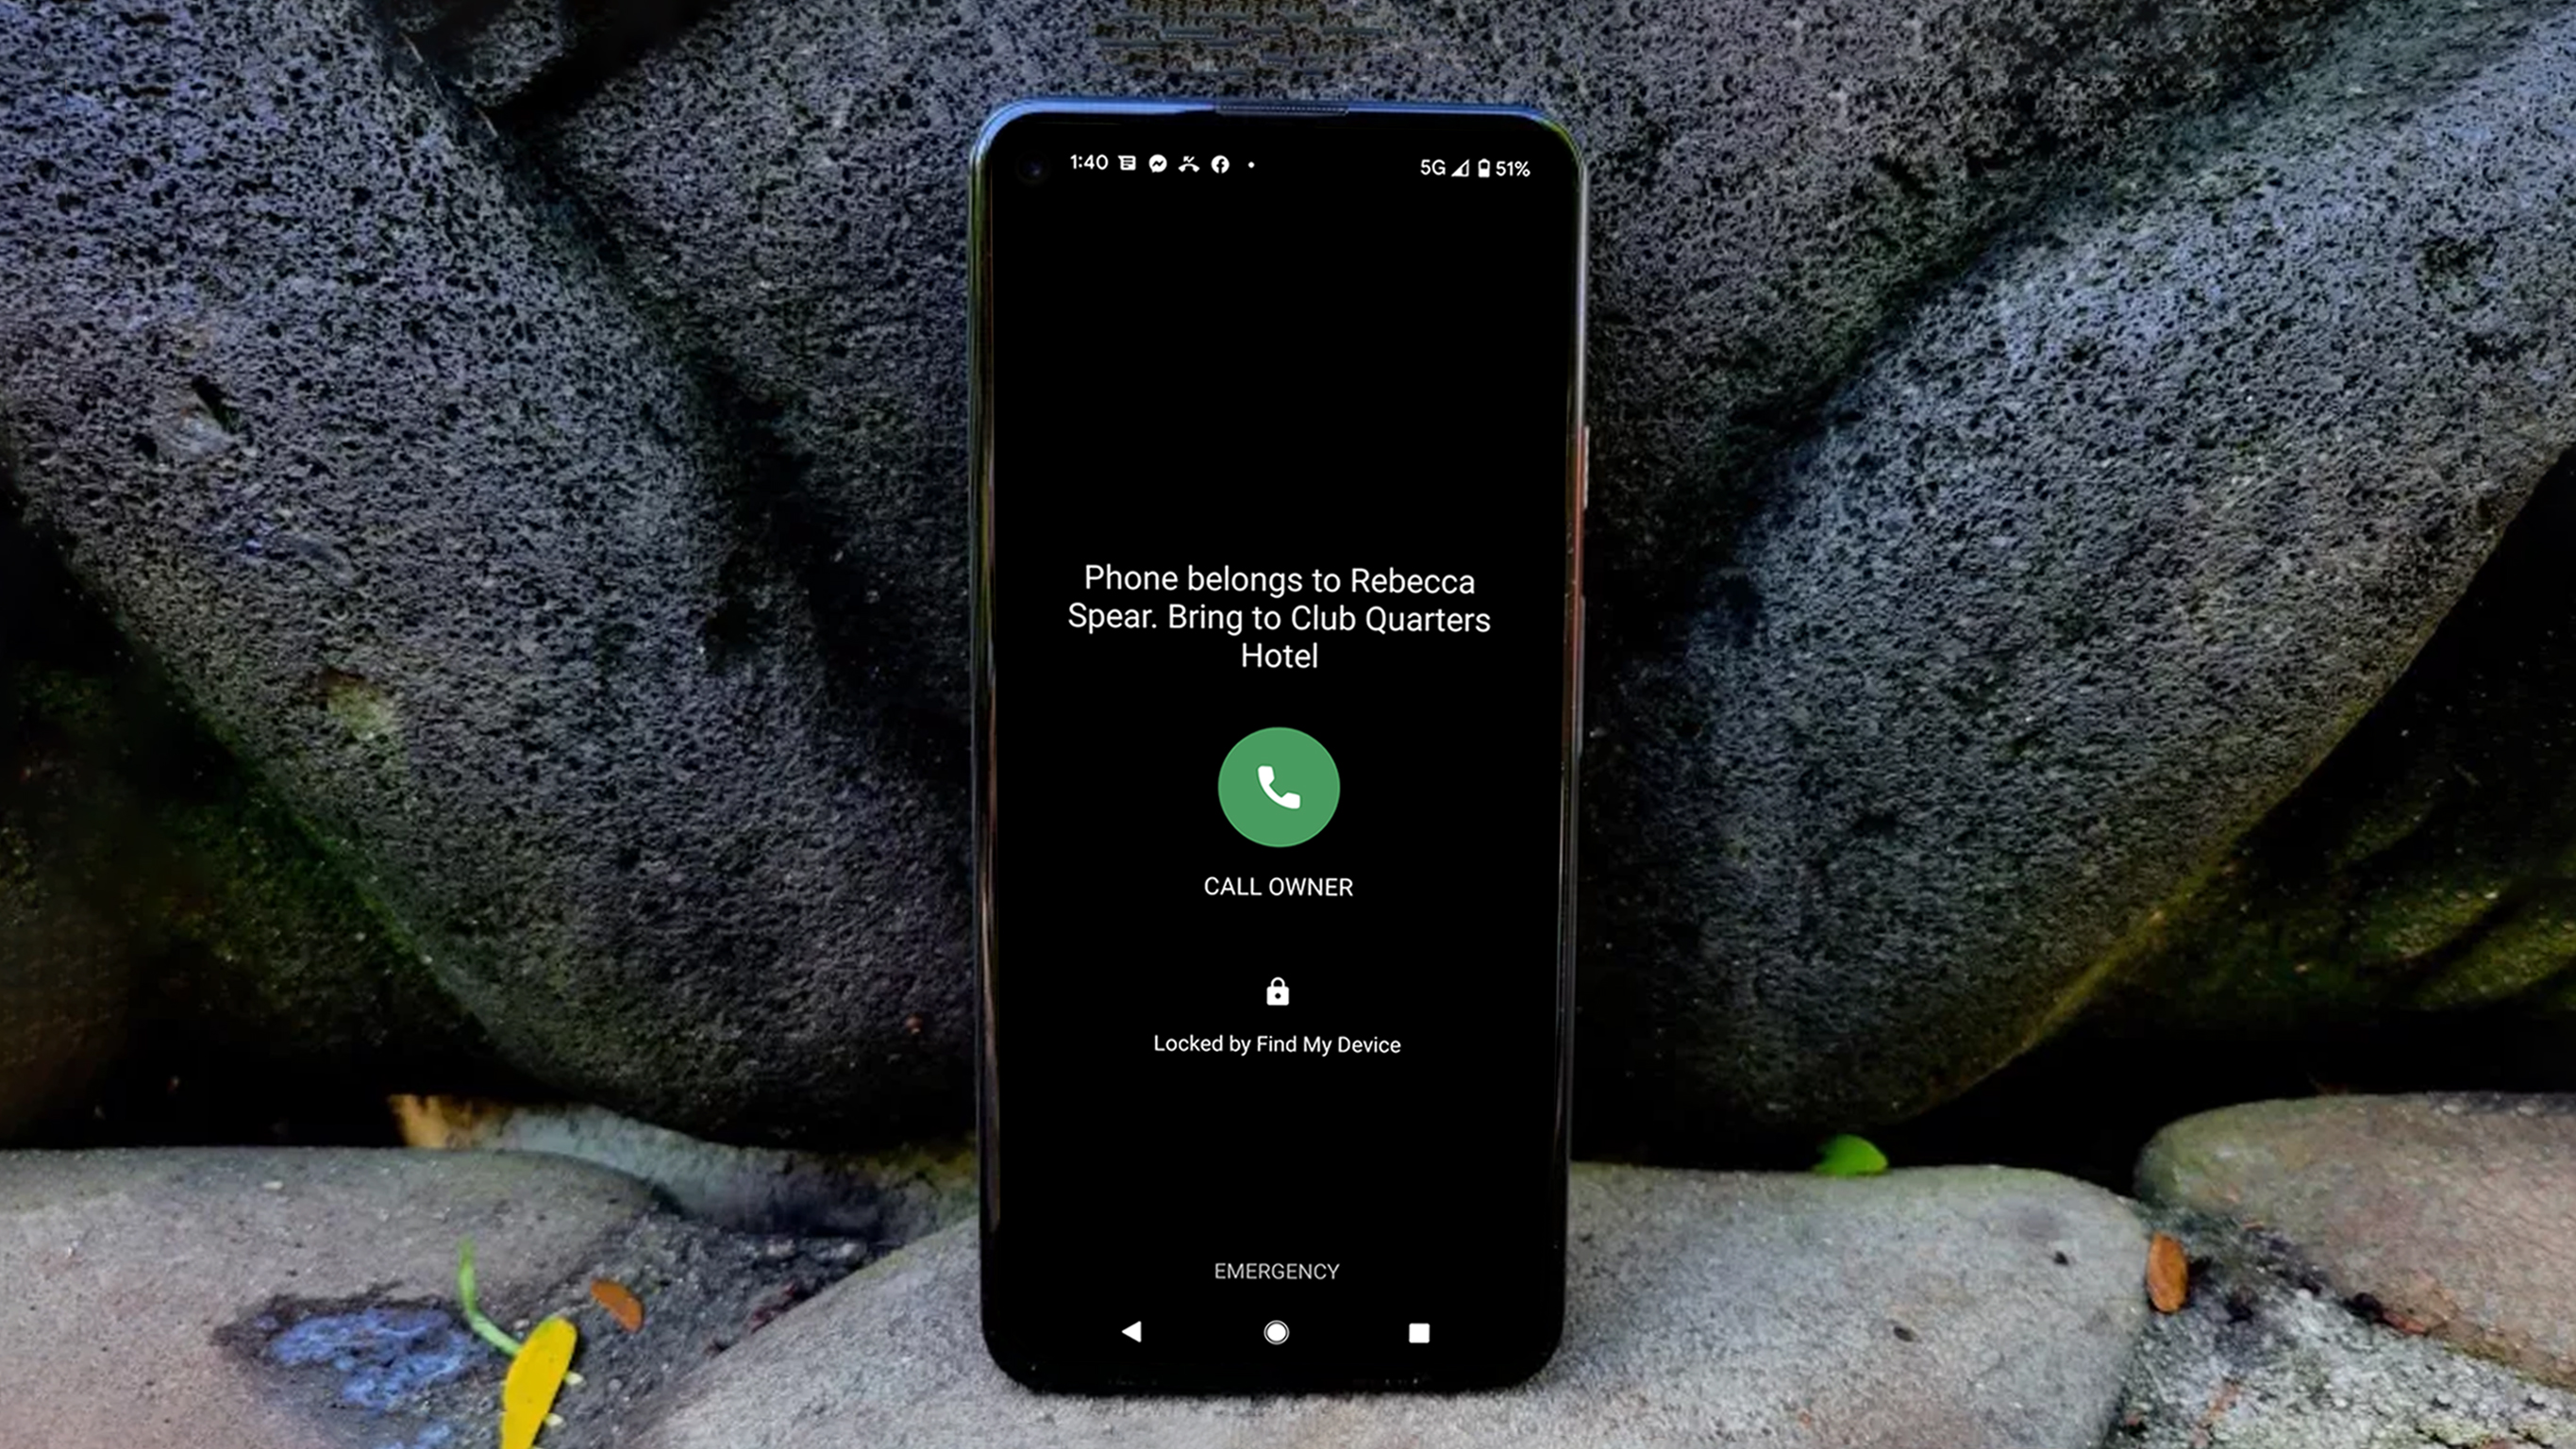 Google Pixel 5a with Find My Device message